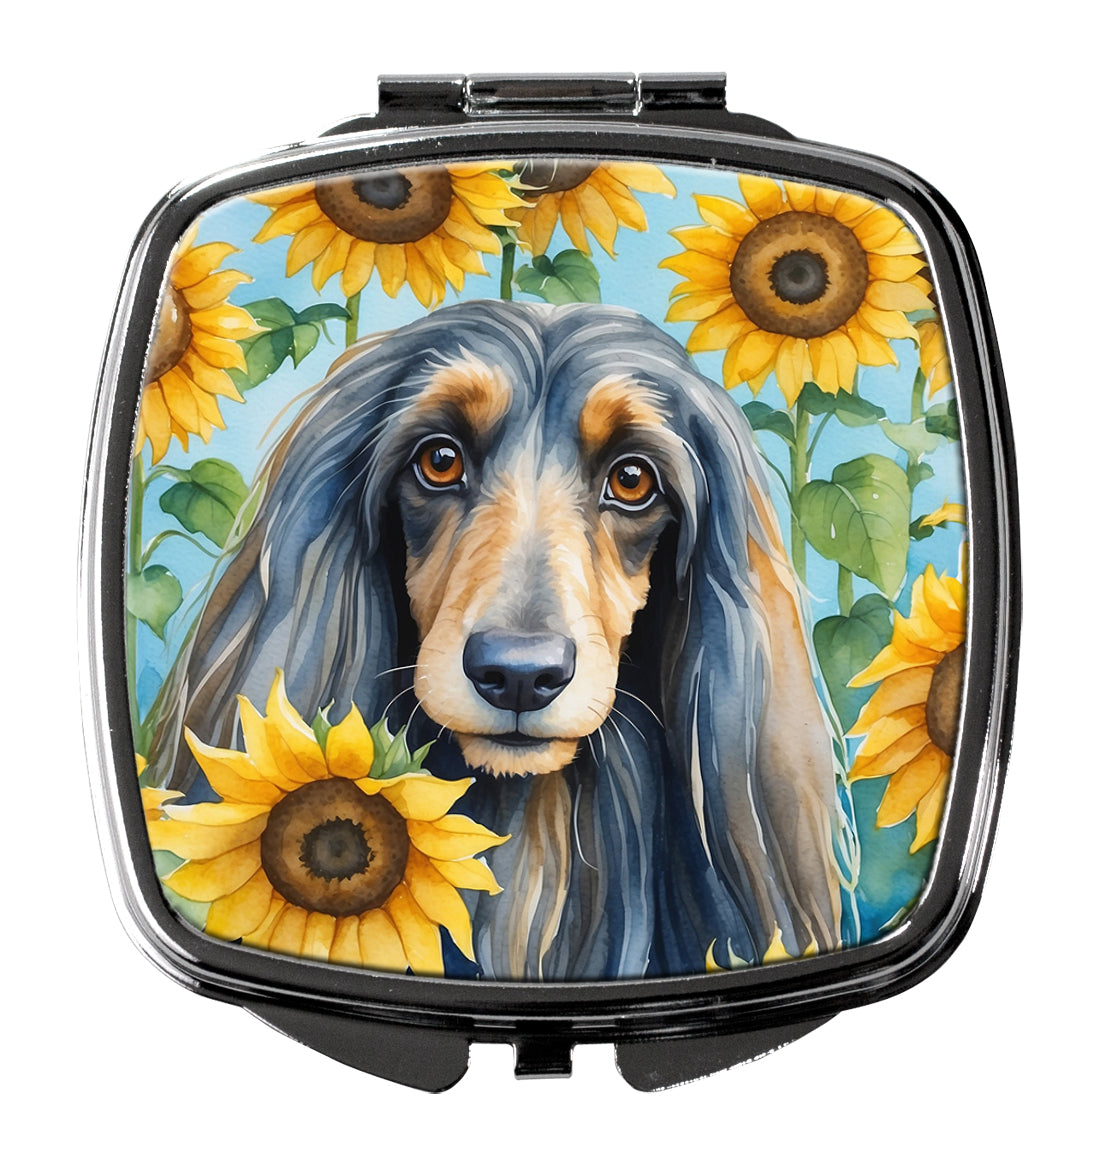 Buy this Afghan Hound in Sunflowers Compact Mirror